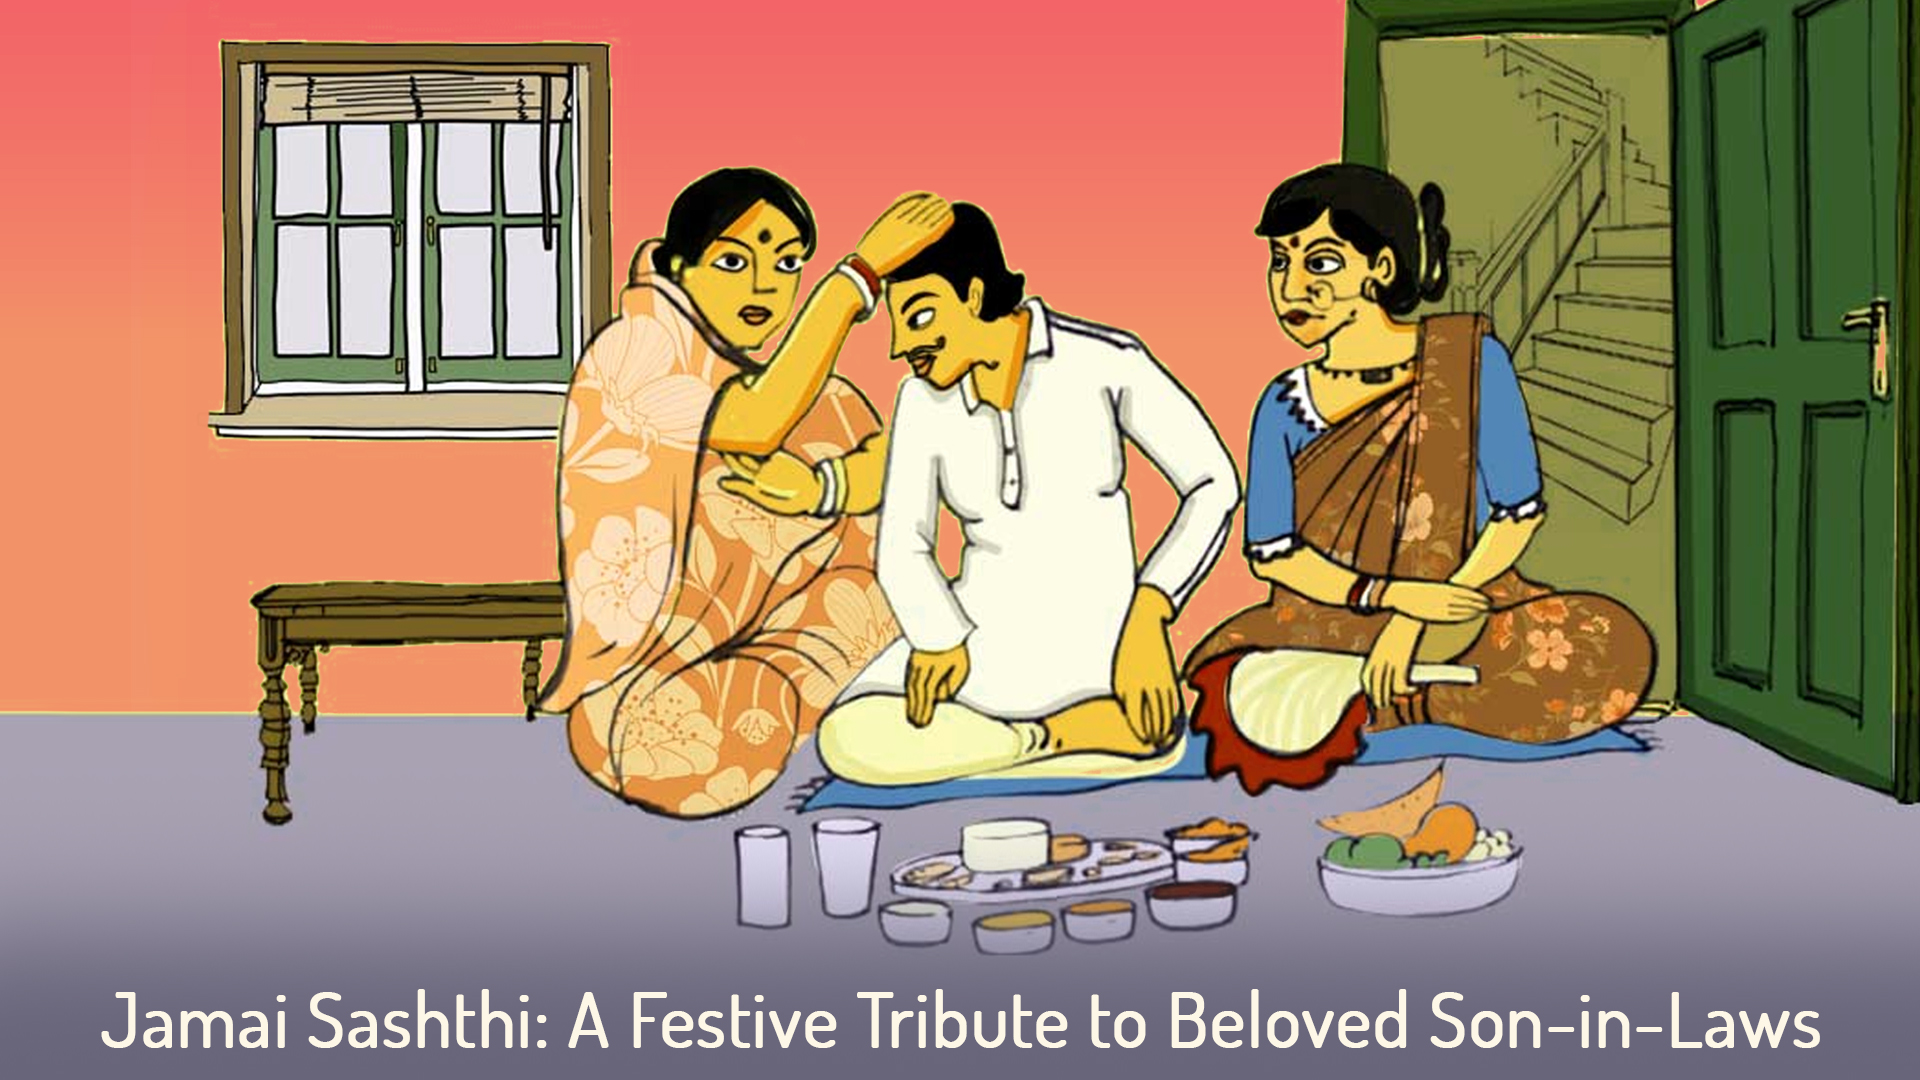 Jamai Sashthi: A Festive Tribute to Beloved Son-in-Laws